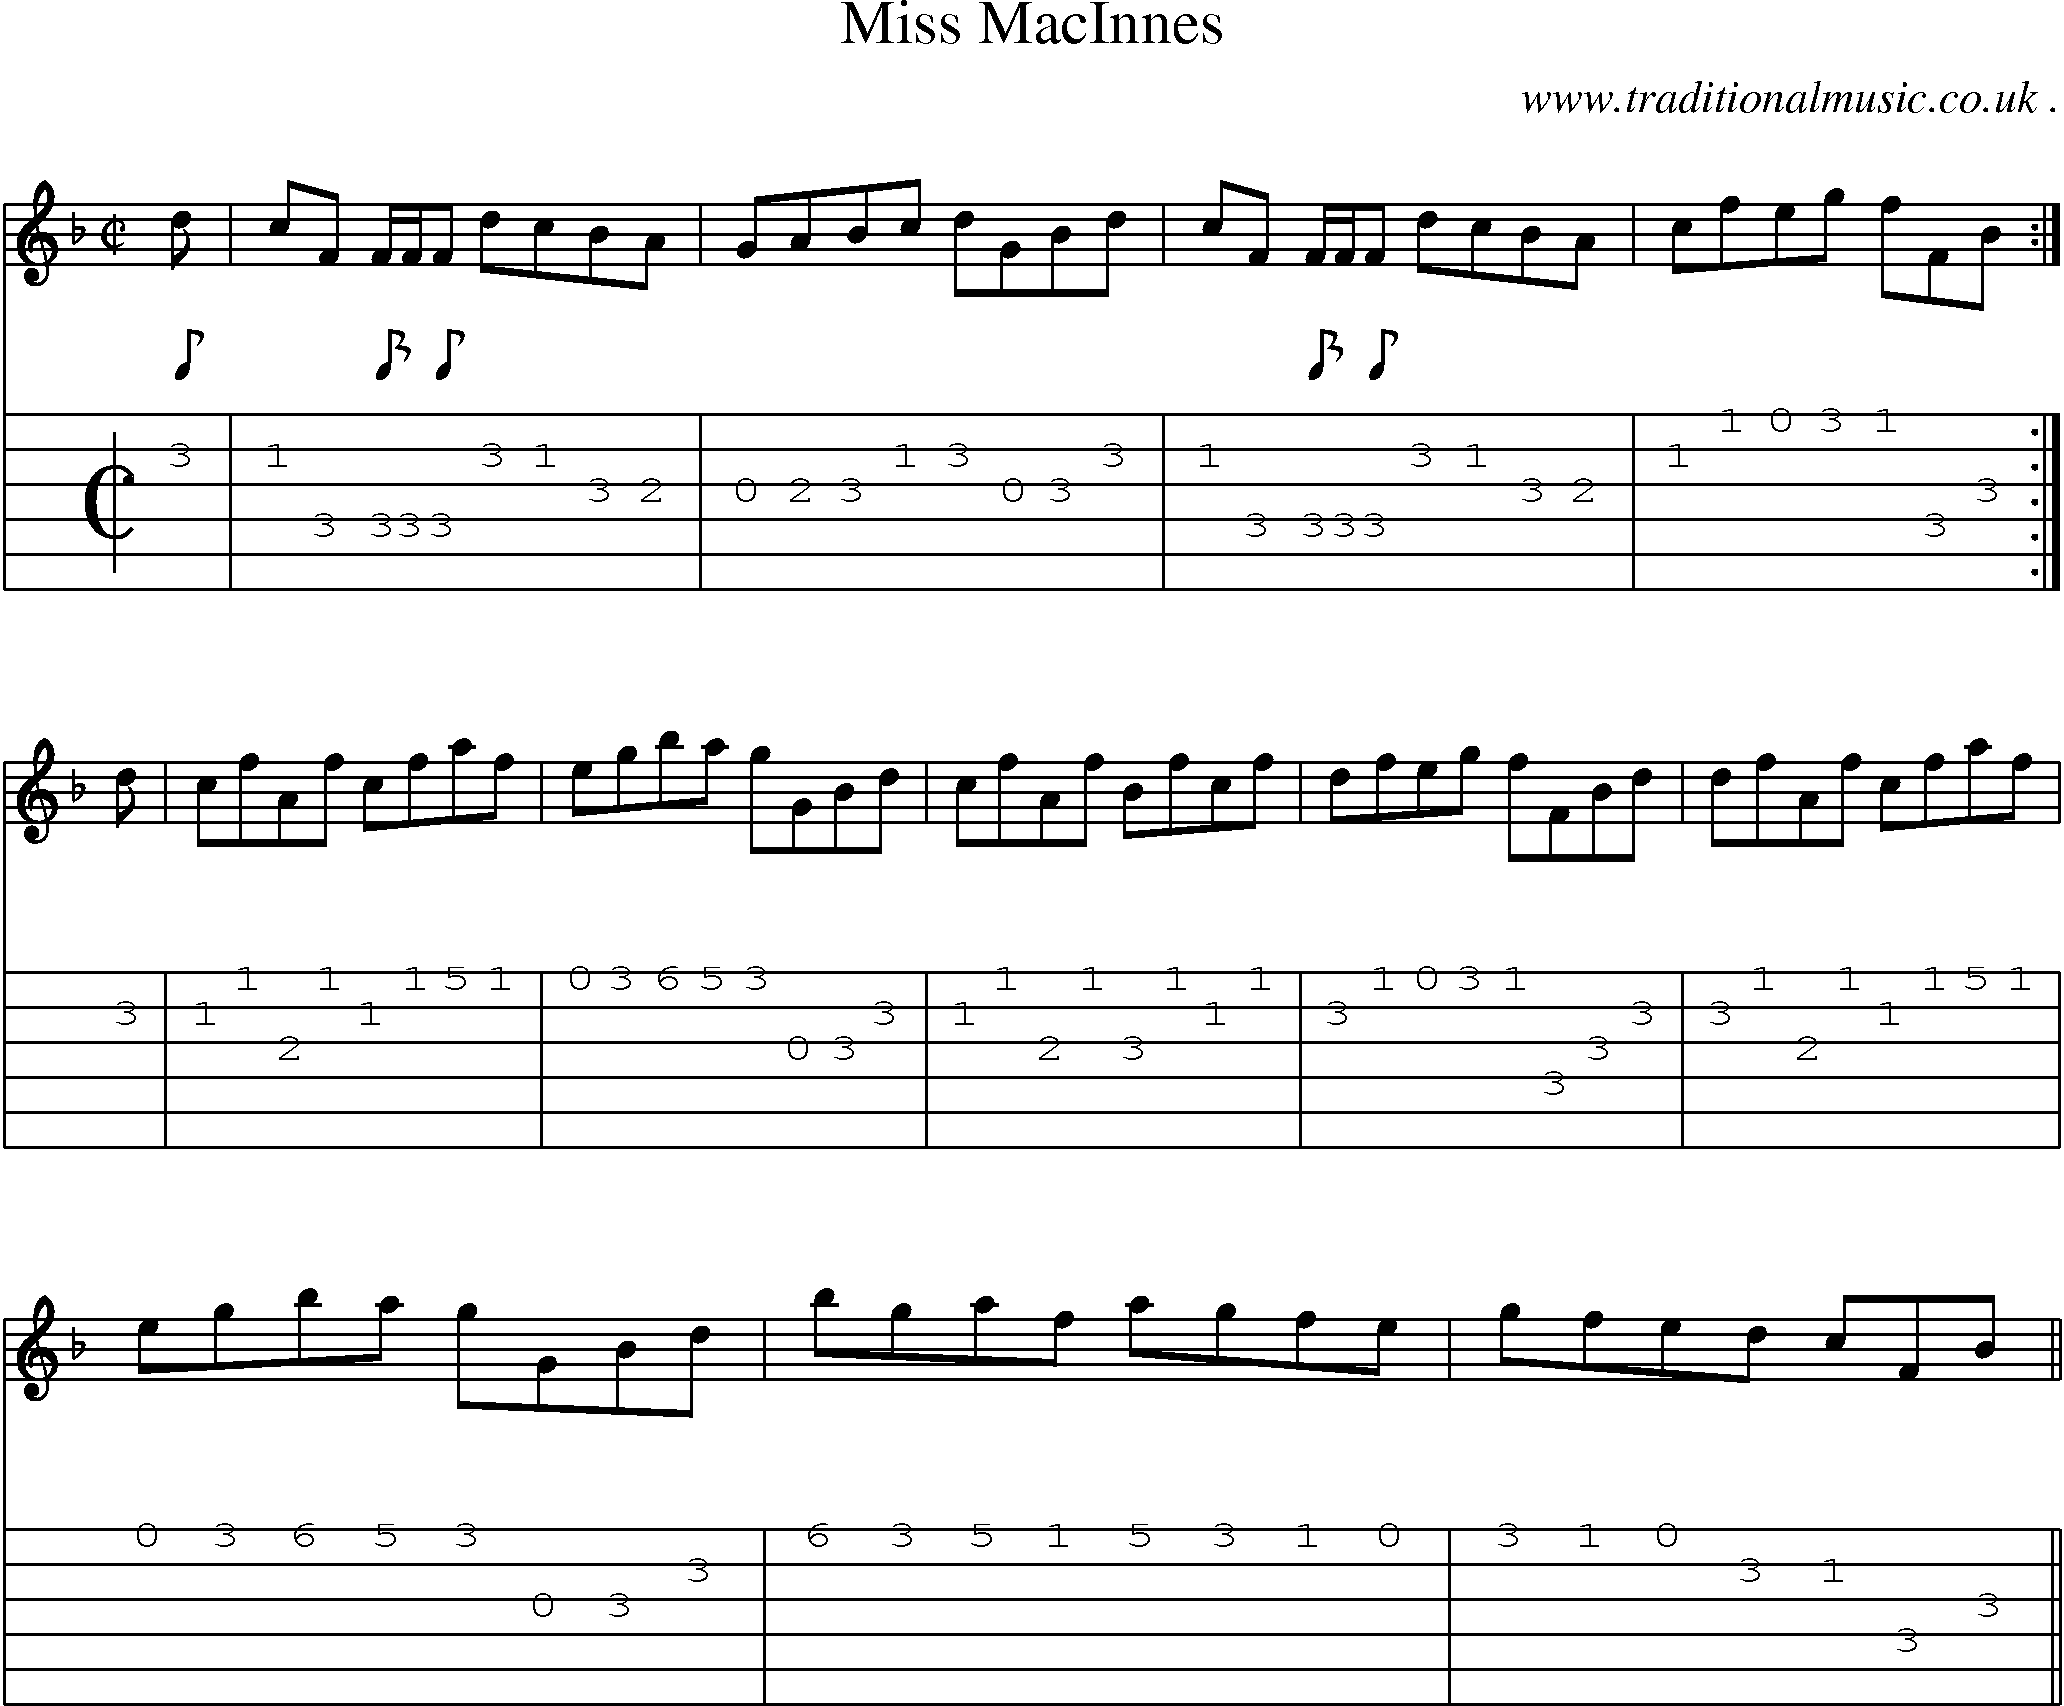 Sheet-music  score, Chords and Guitar Tabs for Miss Macinnes